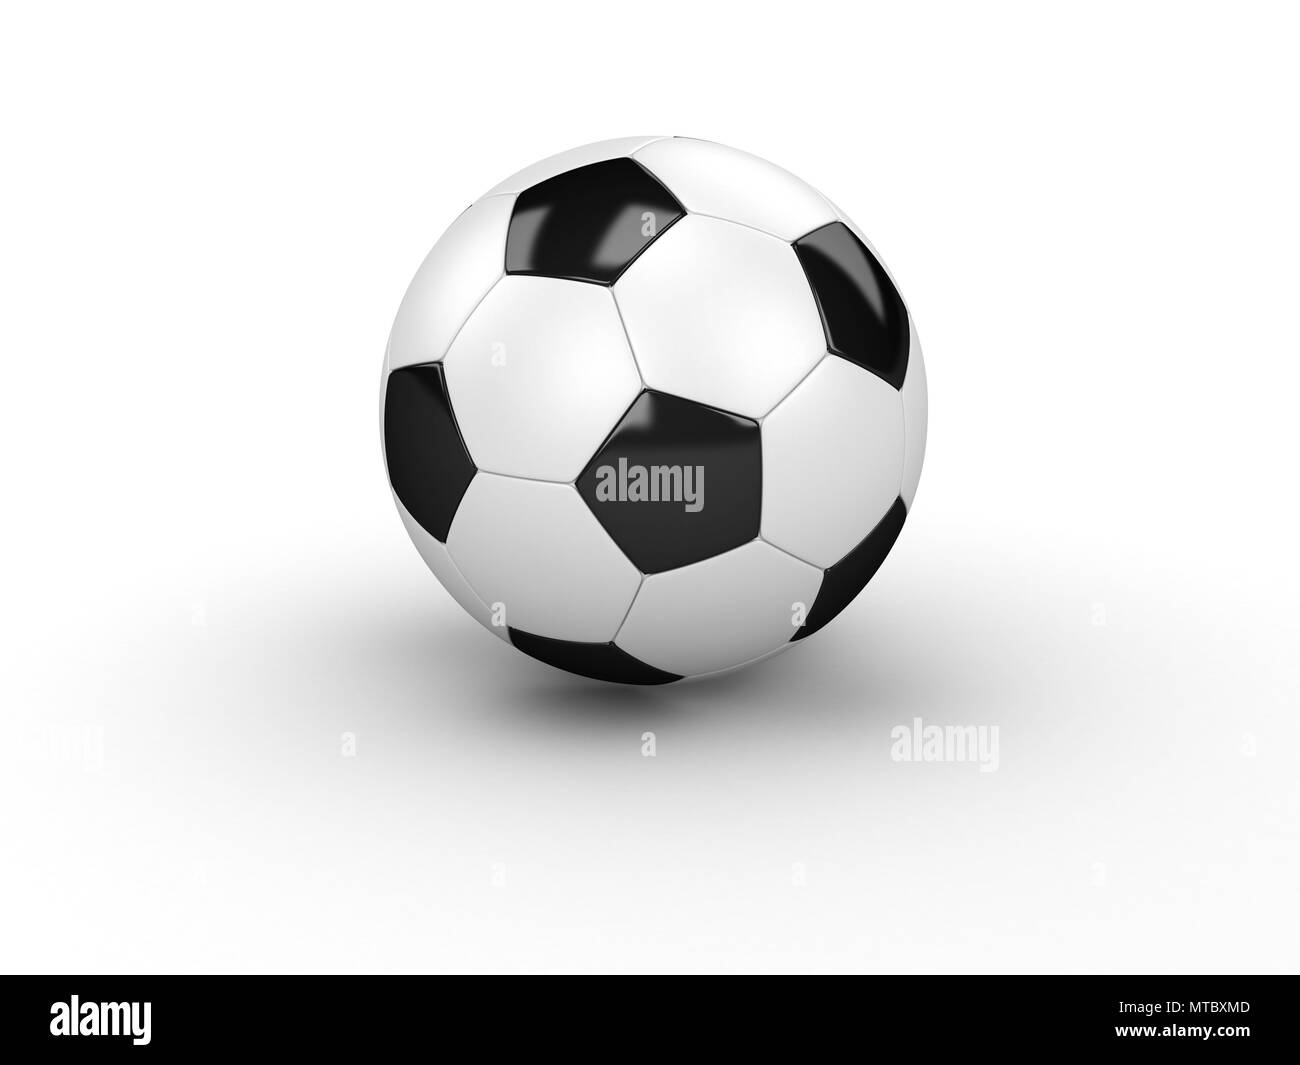 Classic soccer ball isolated on white Stock Photo